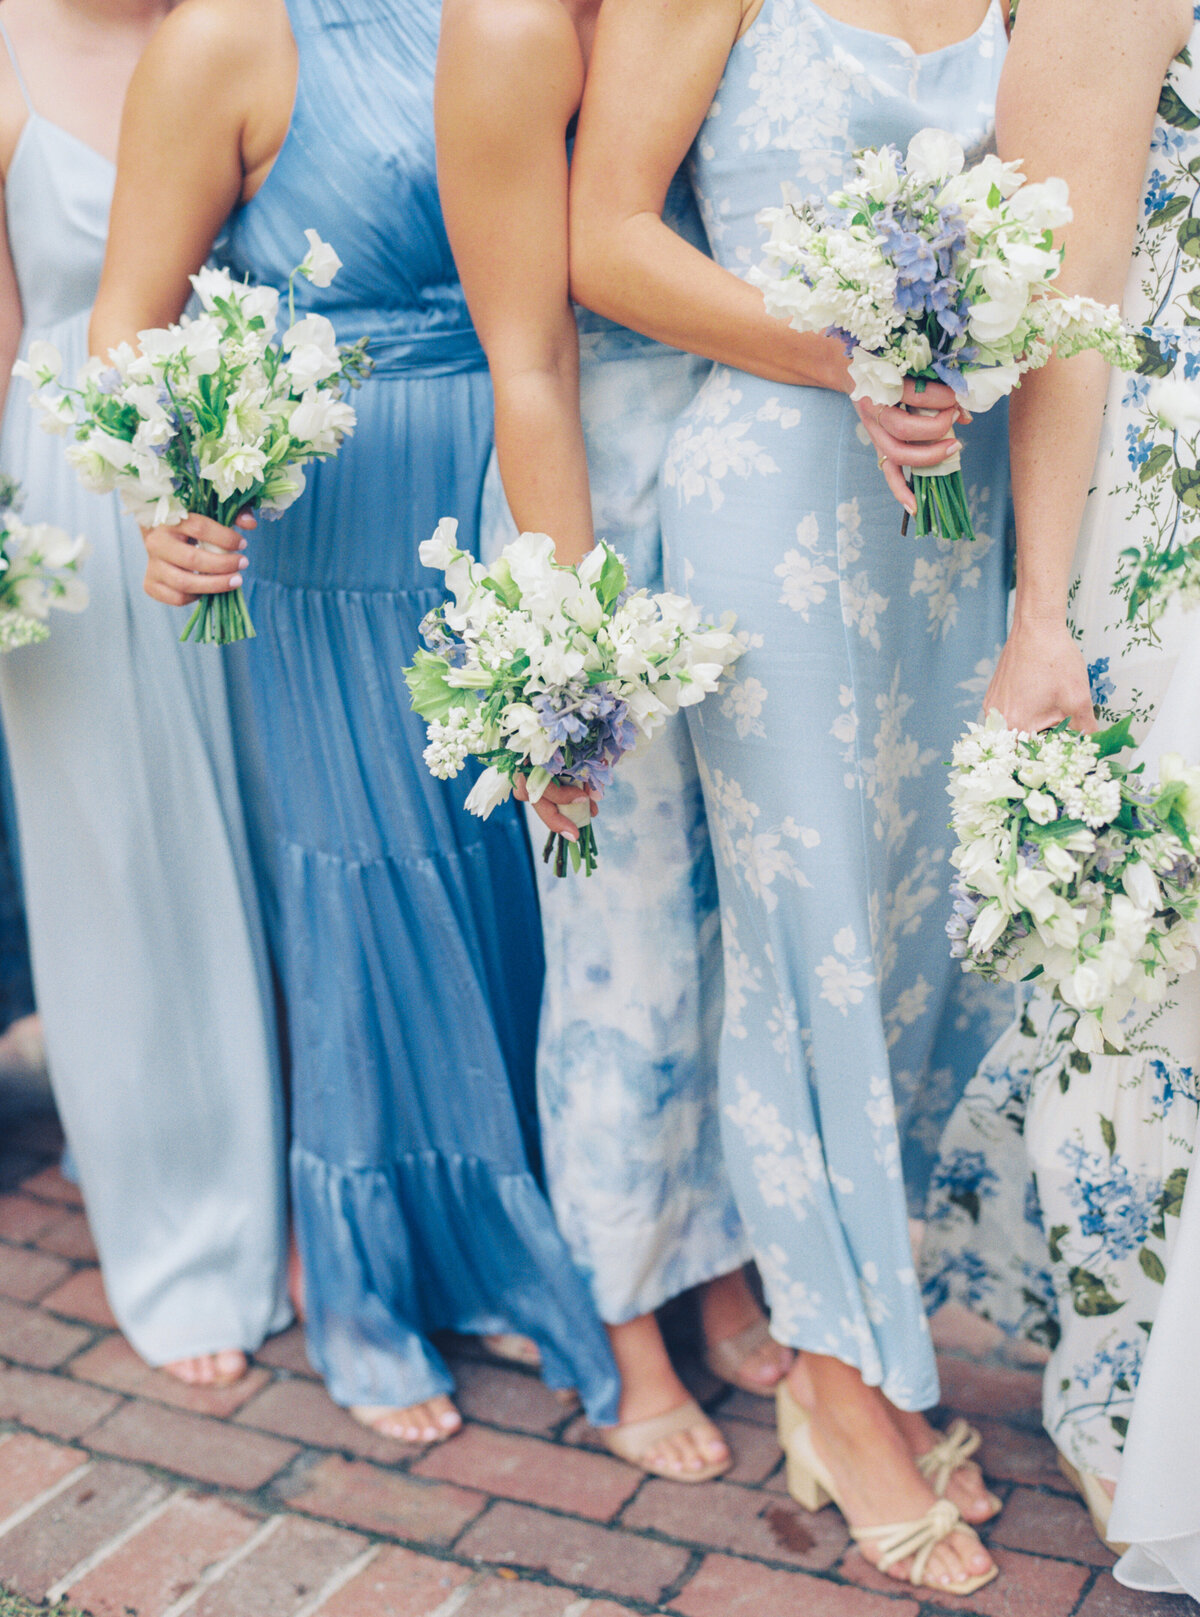 Mix-matched blue bridesmaids dresses. Spring wedding at Lowndes Grove.